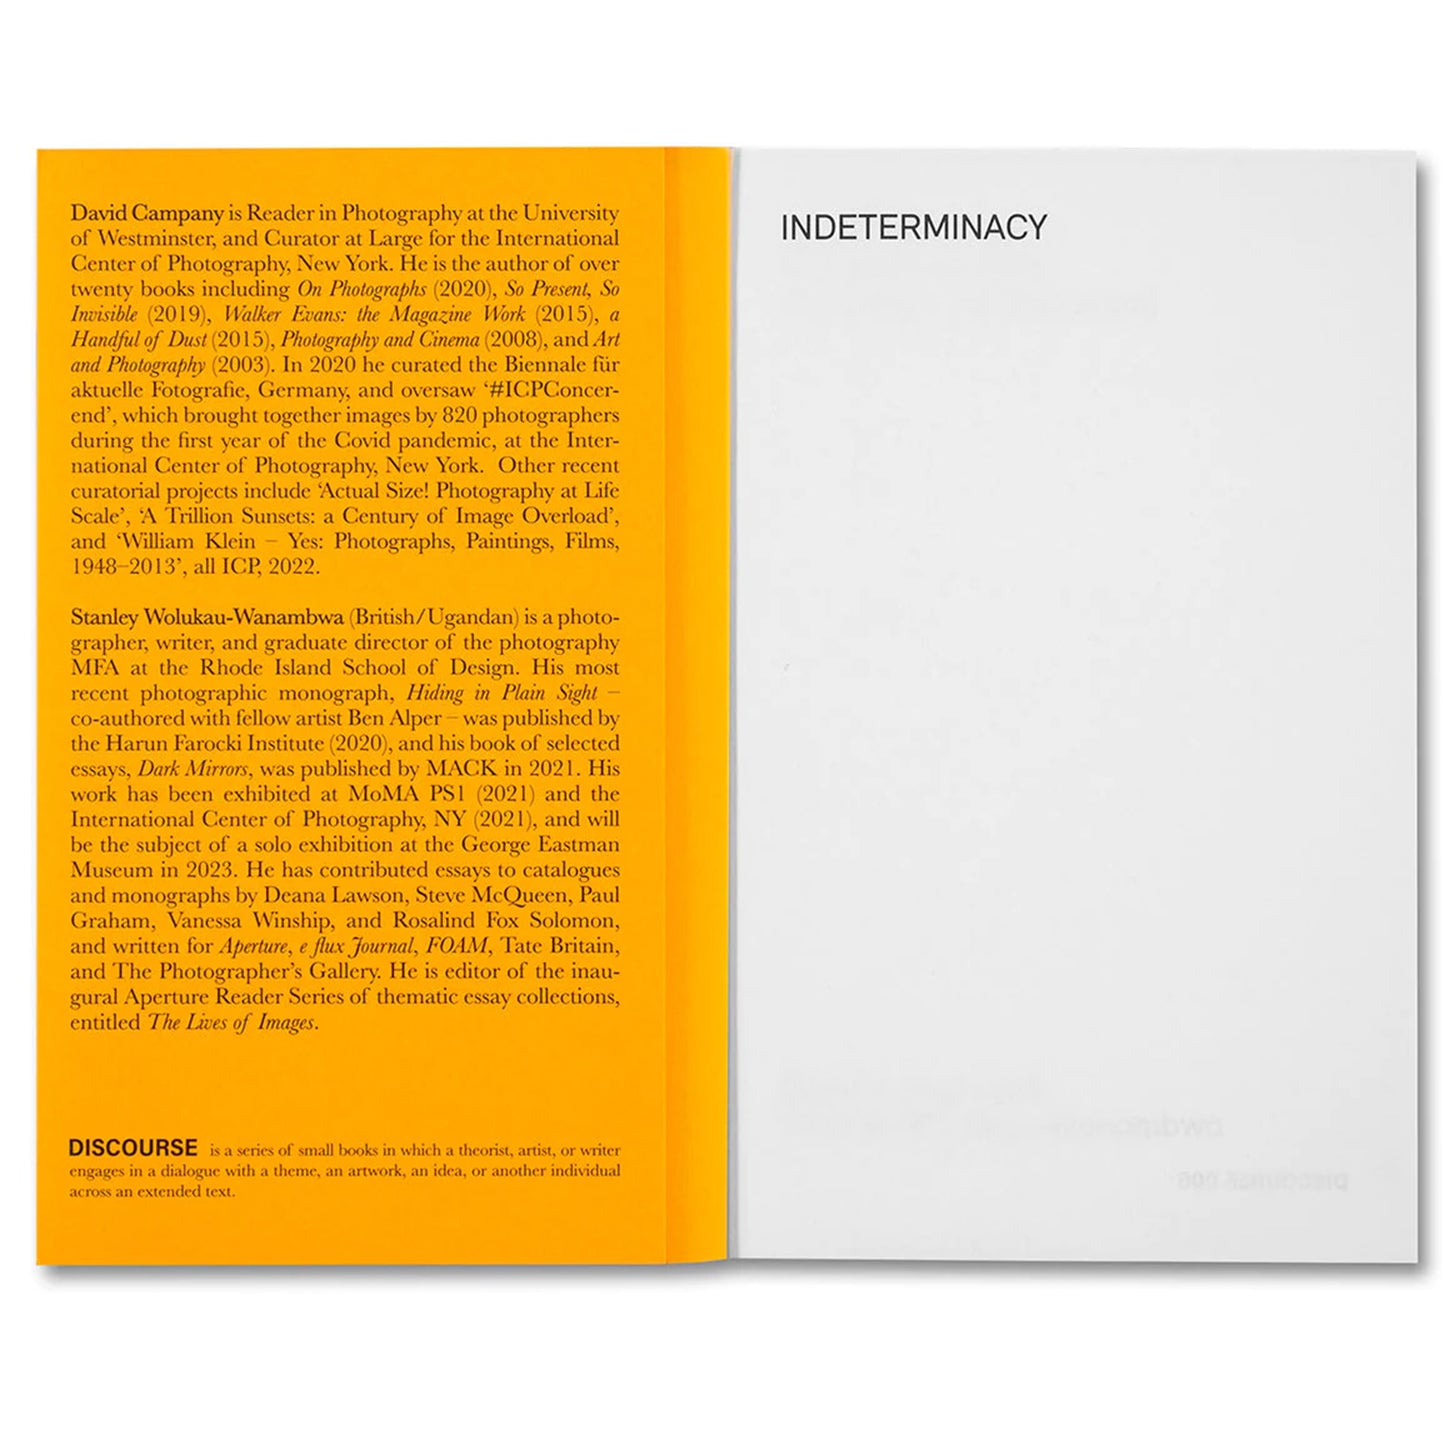 Indeterminacy: Thoughts on Time, the Image, and Race(ism) by David Campany & Stanley Wolukau-Wanambwa